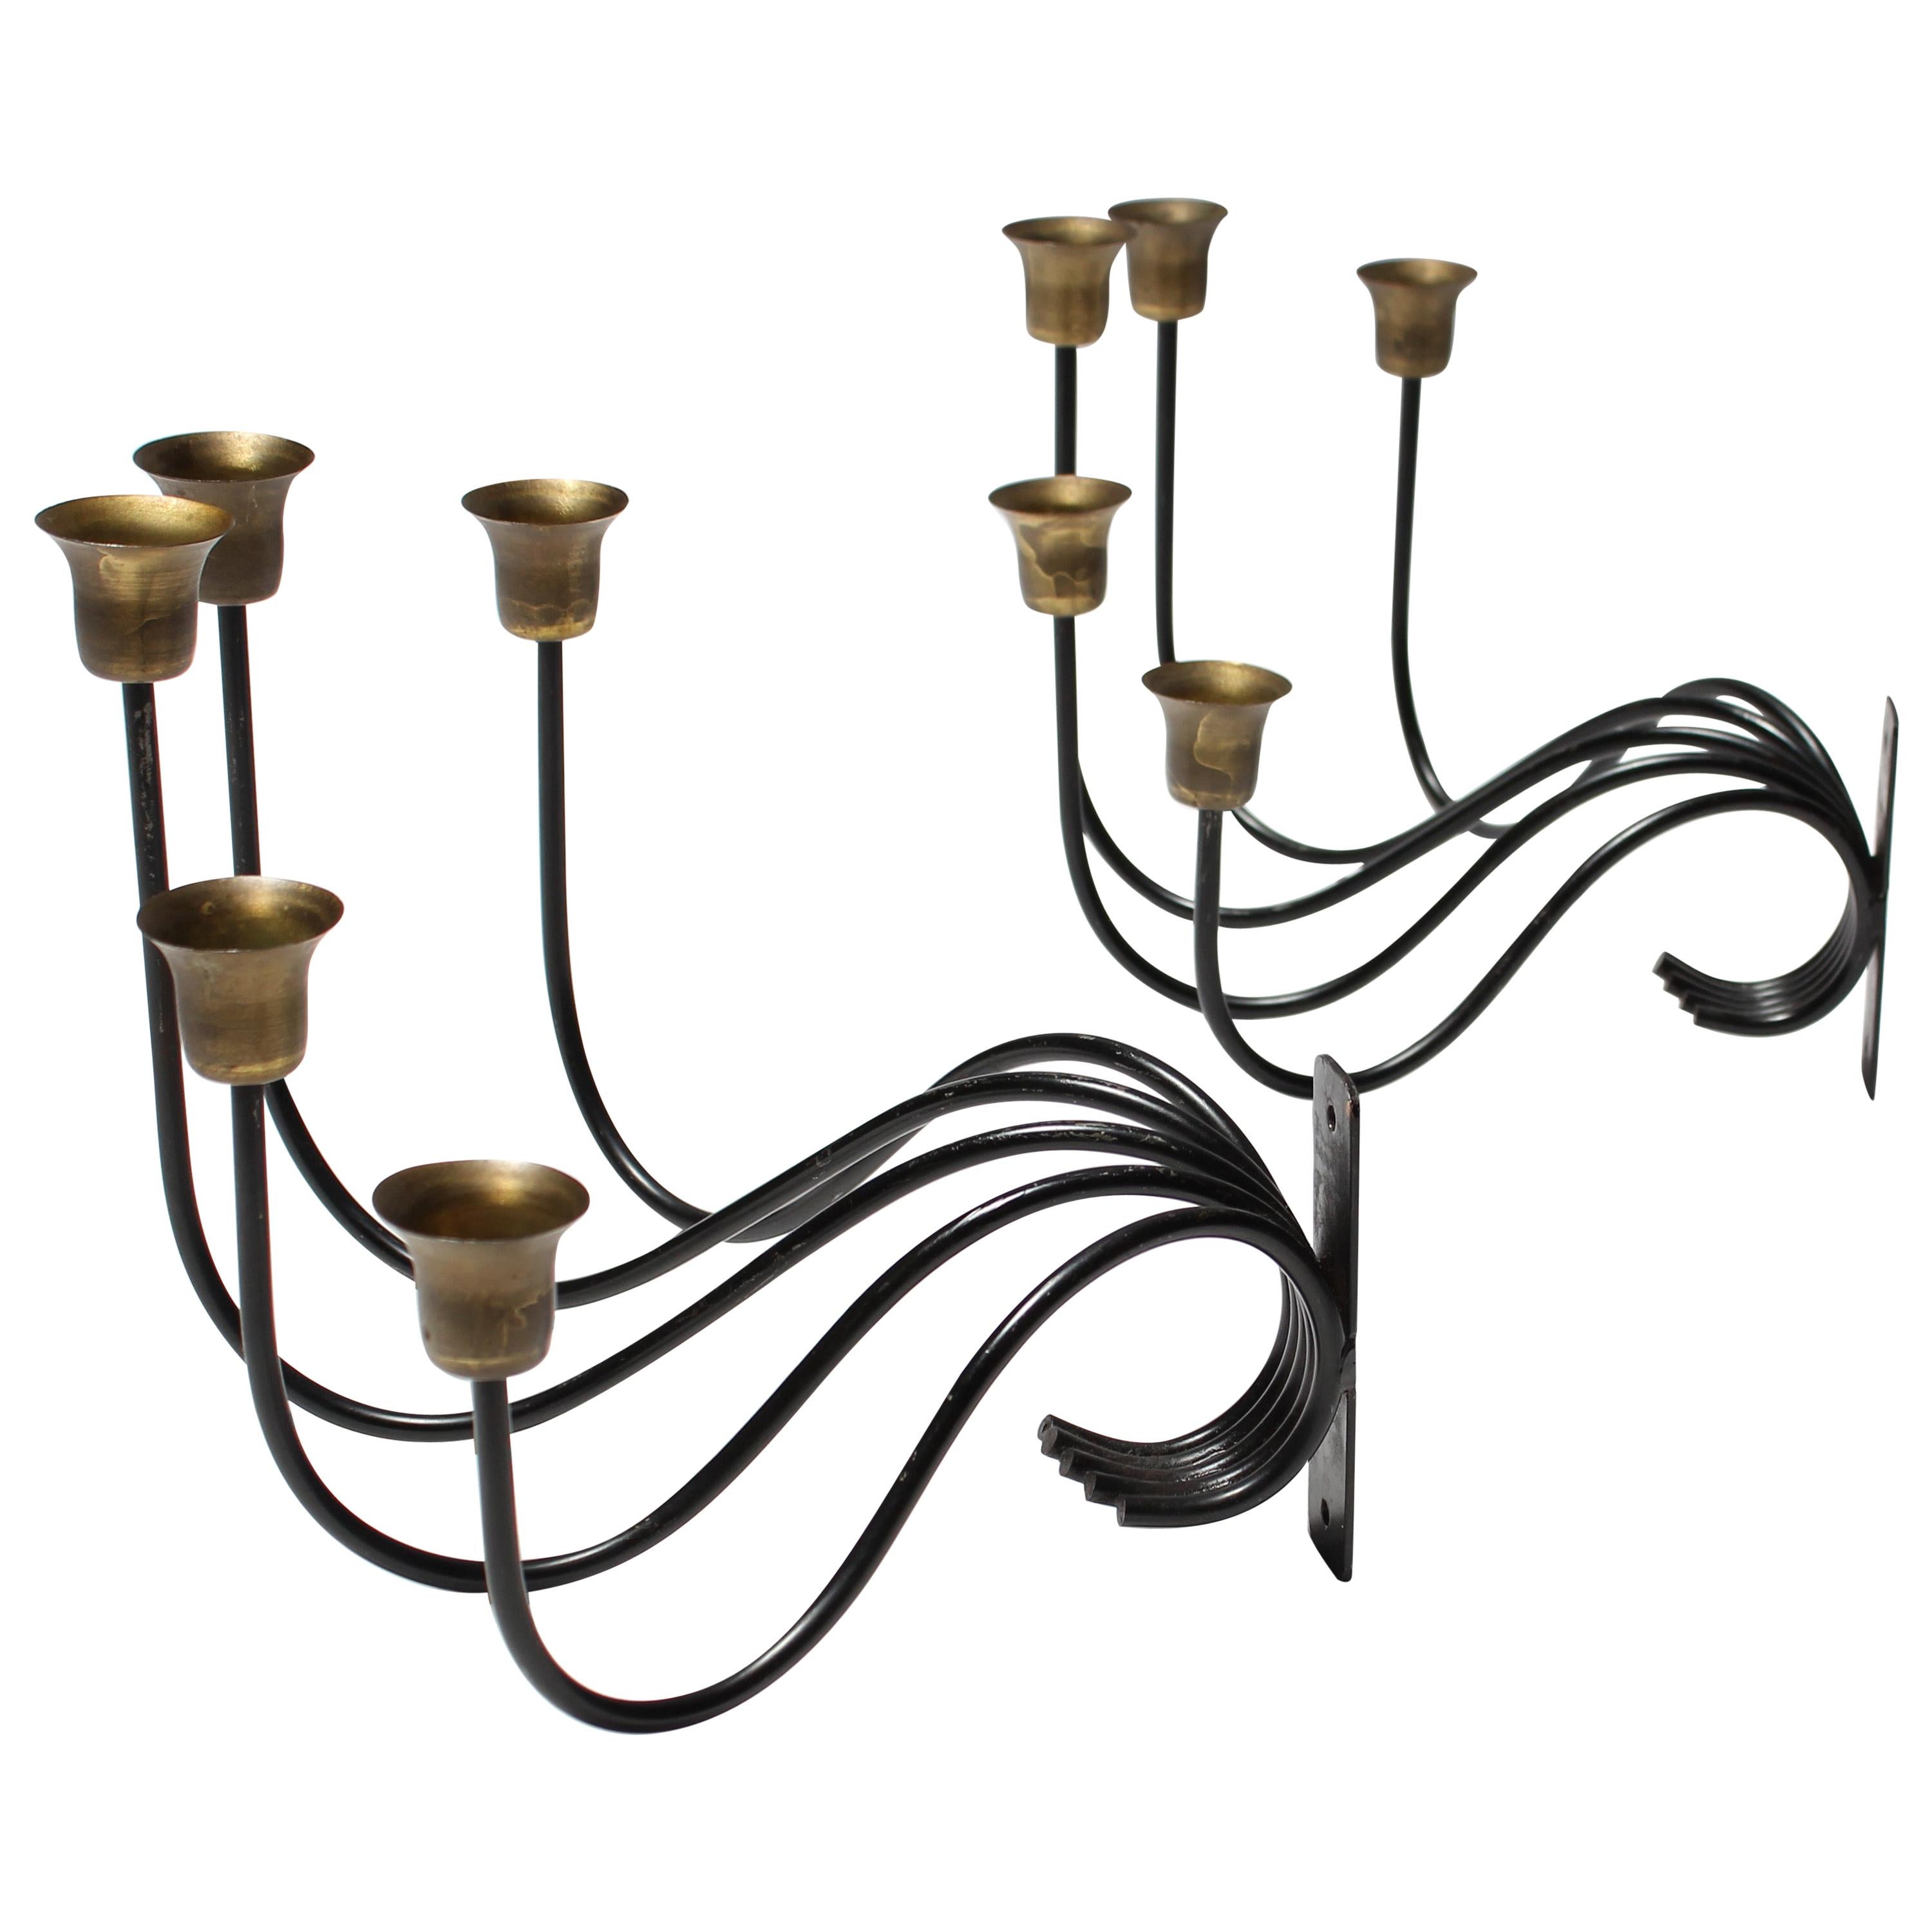 Pair of Brass and Metal Danish Candle Sconces by Svend Aage Holm Sørensen